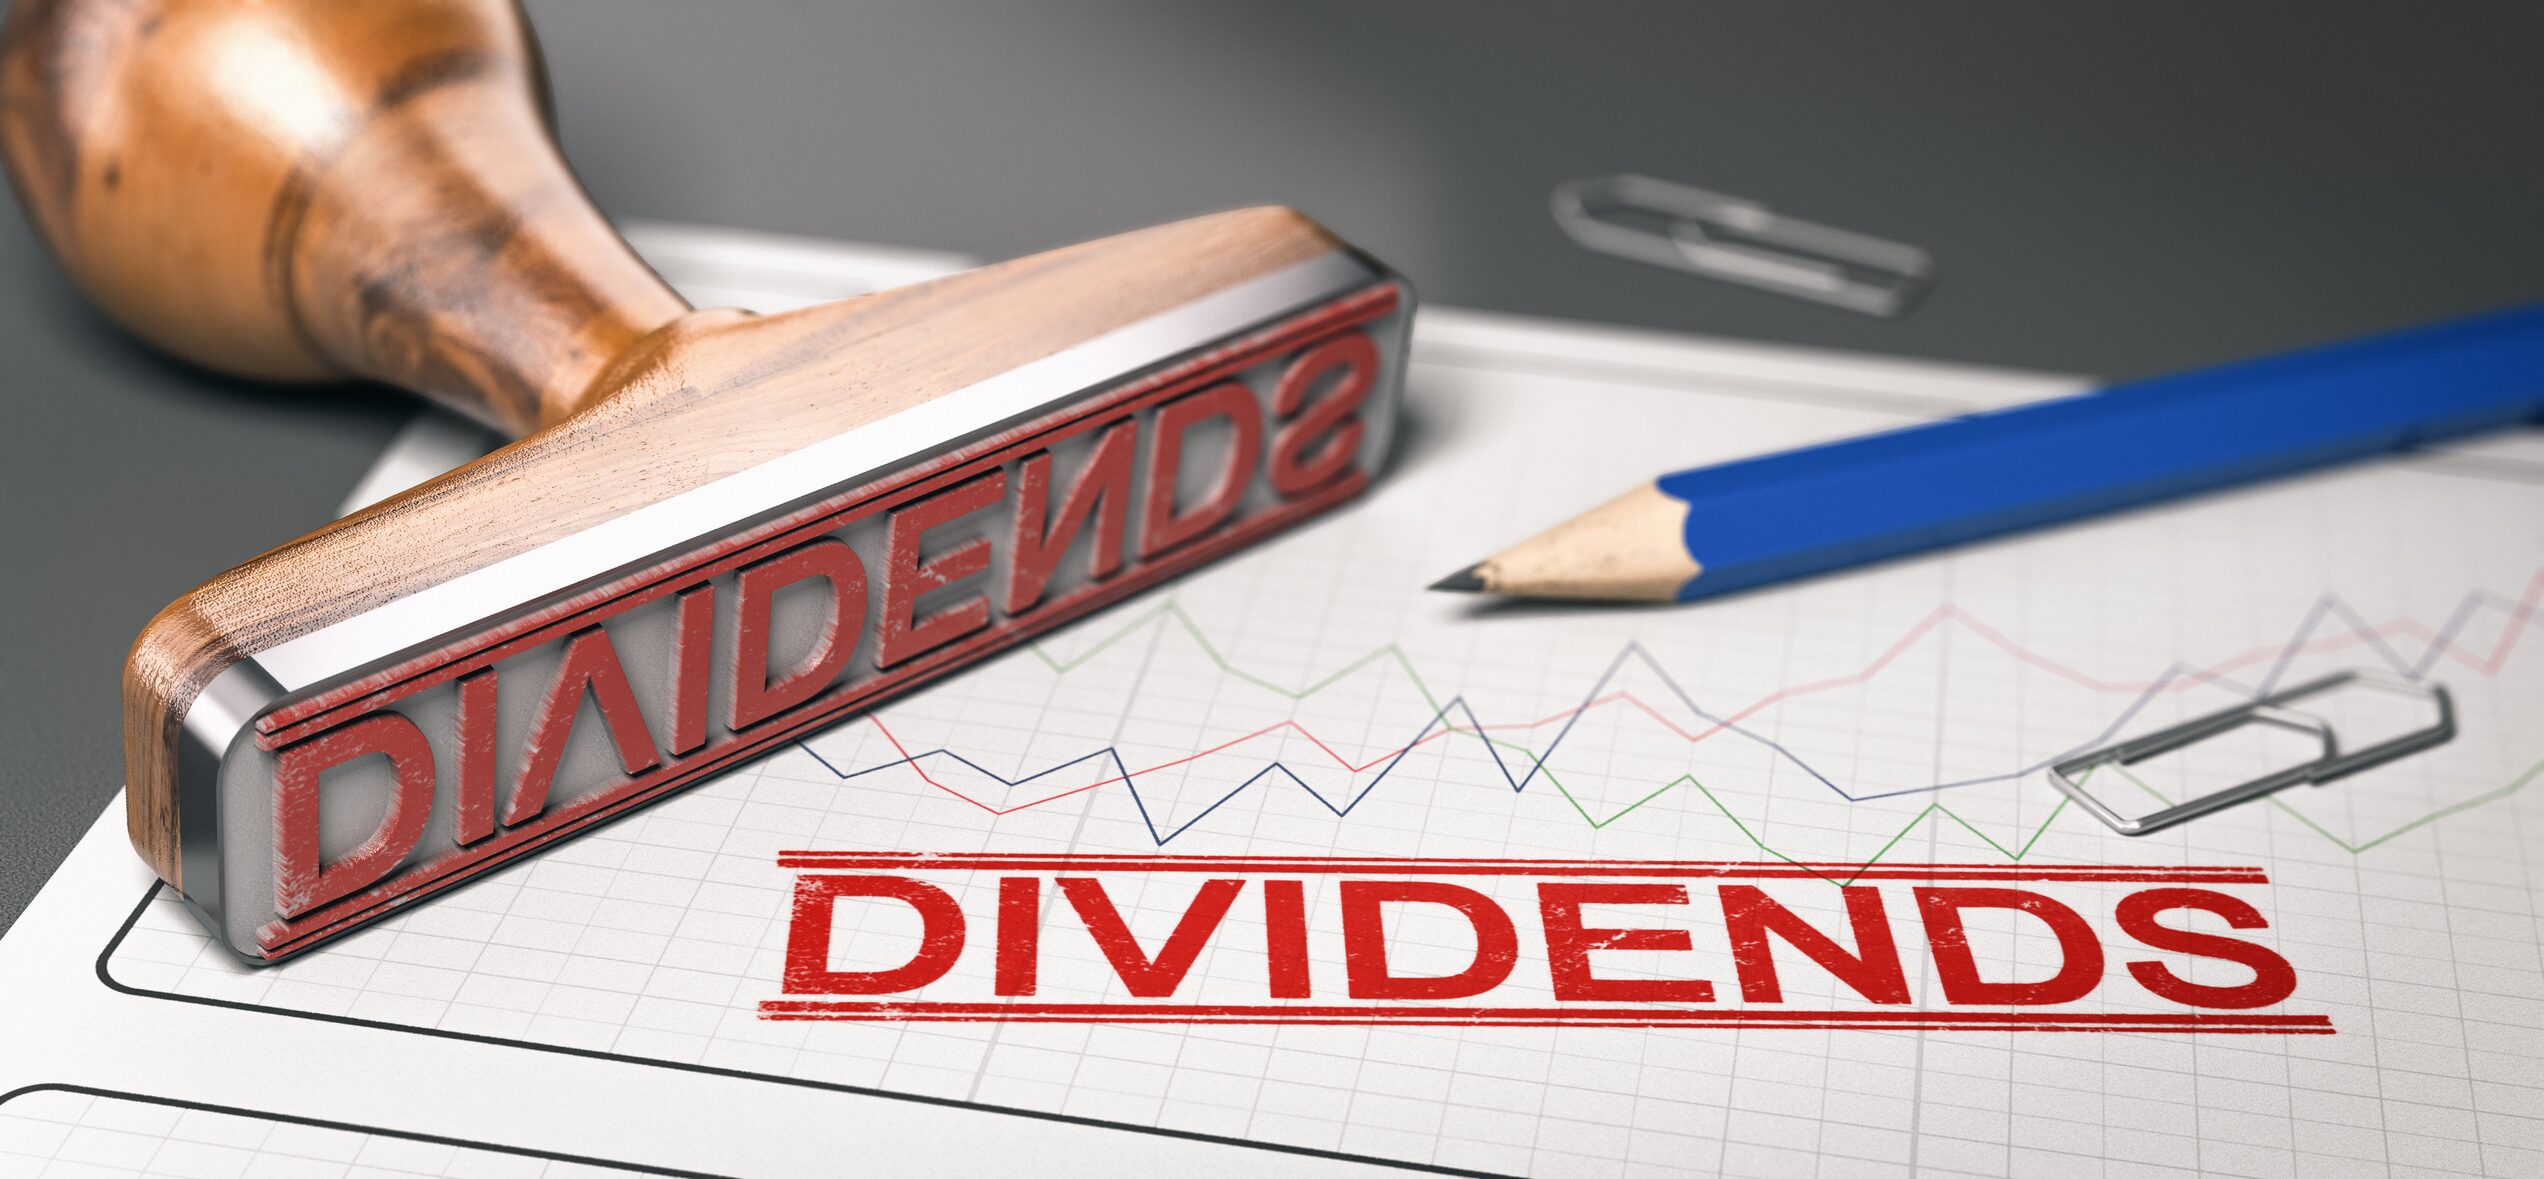 What are dividend cuts and what can they mean?